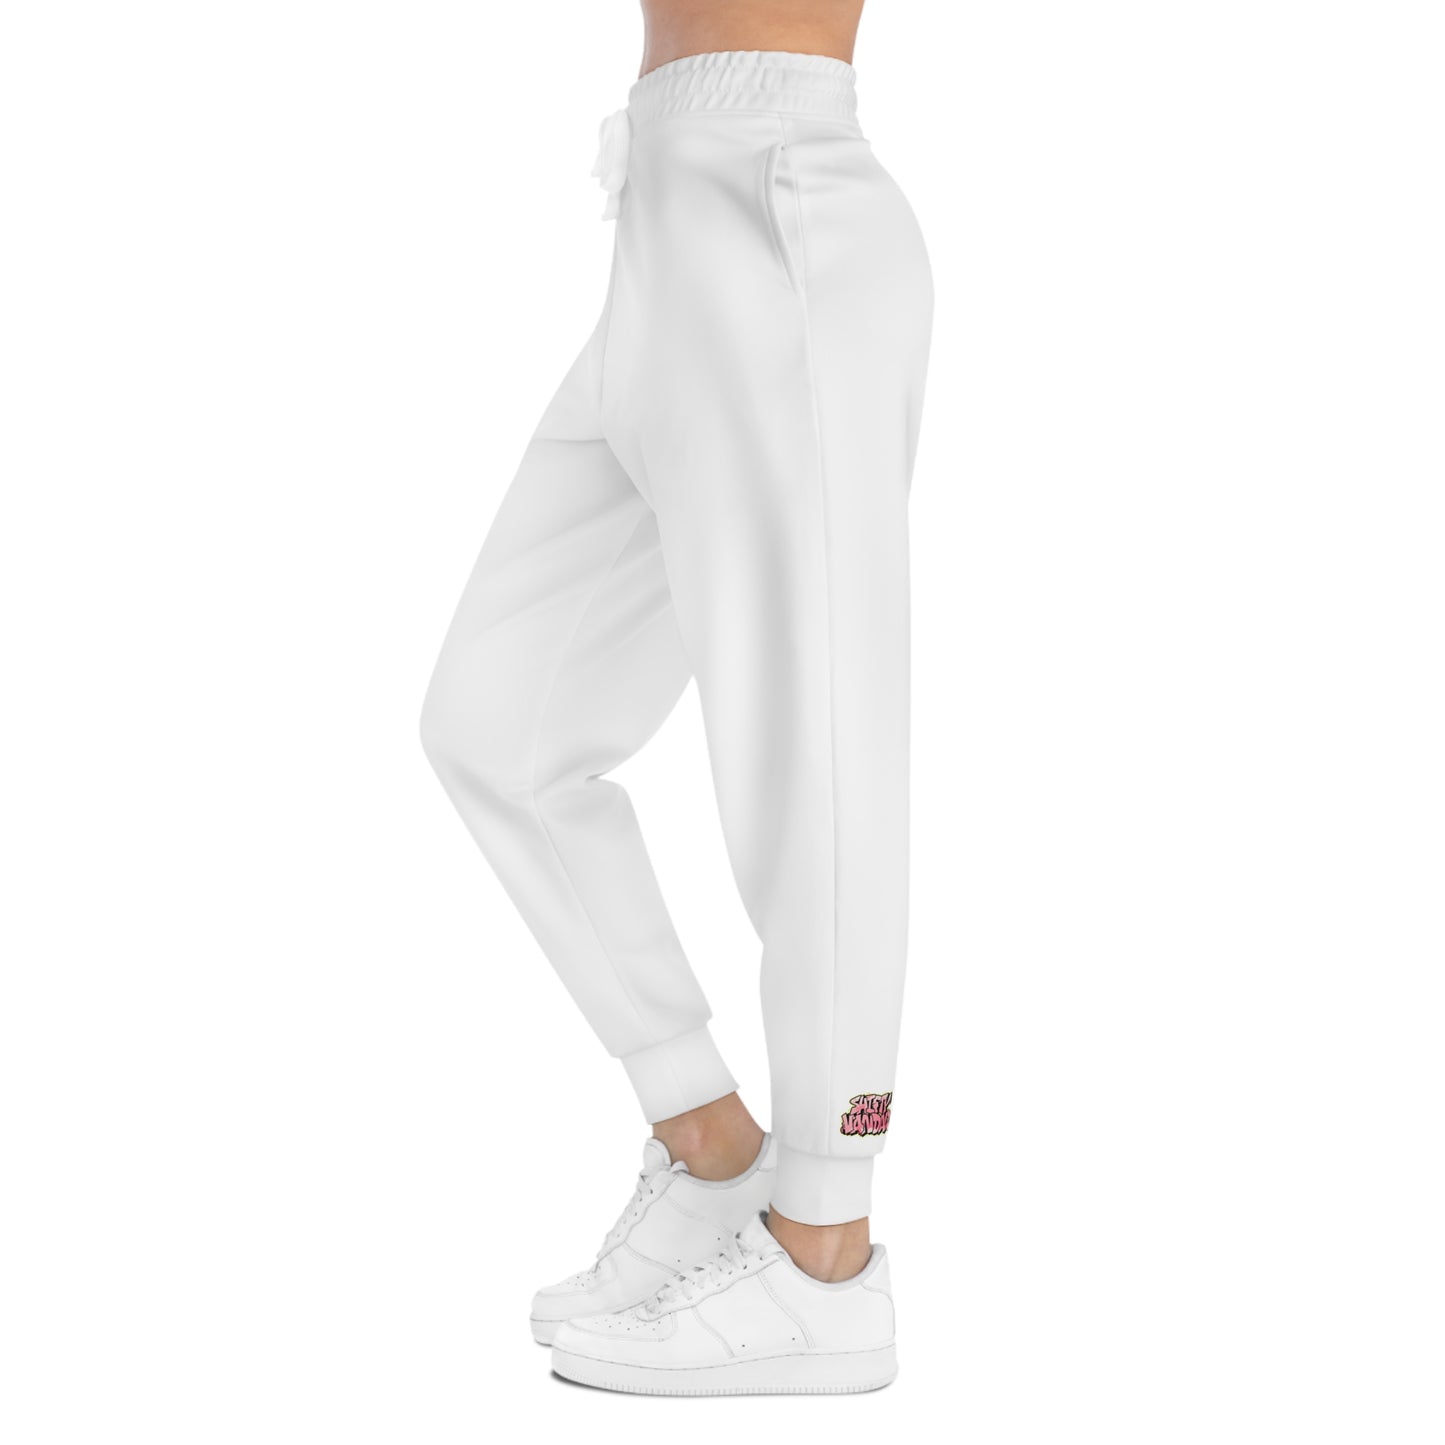 Official Shiftyvandalz joggers (Images switched)